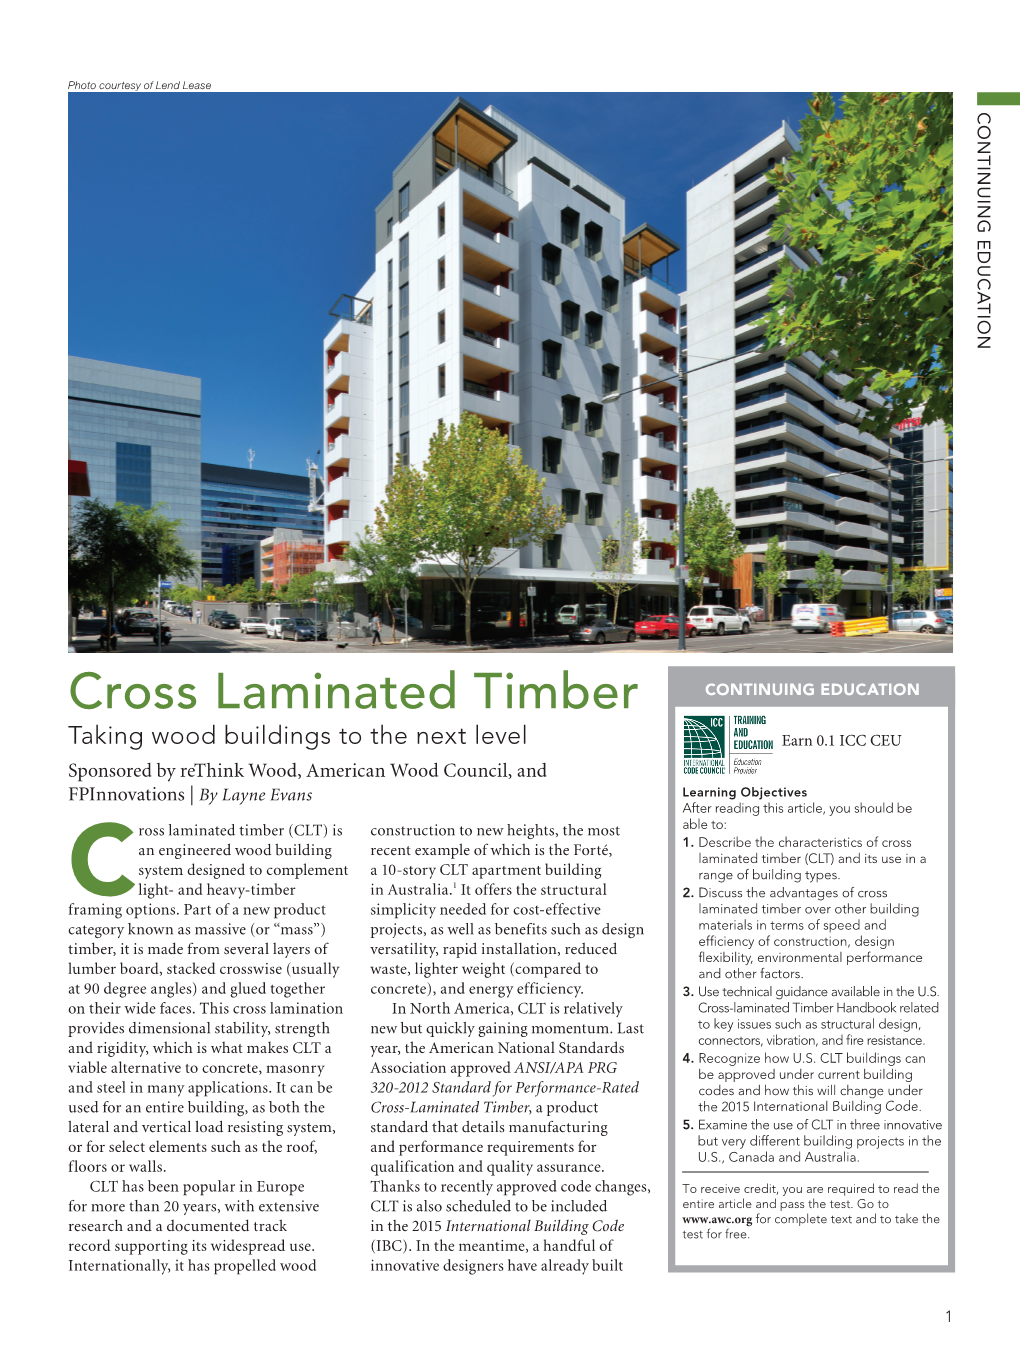 Cross Laminated Timber Over Other Building Materials in Terms of Speed and Efficiency of Construction, Design Performance Environmental Flexibility, and Other Factors